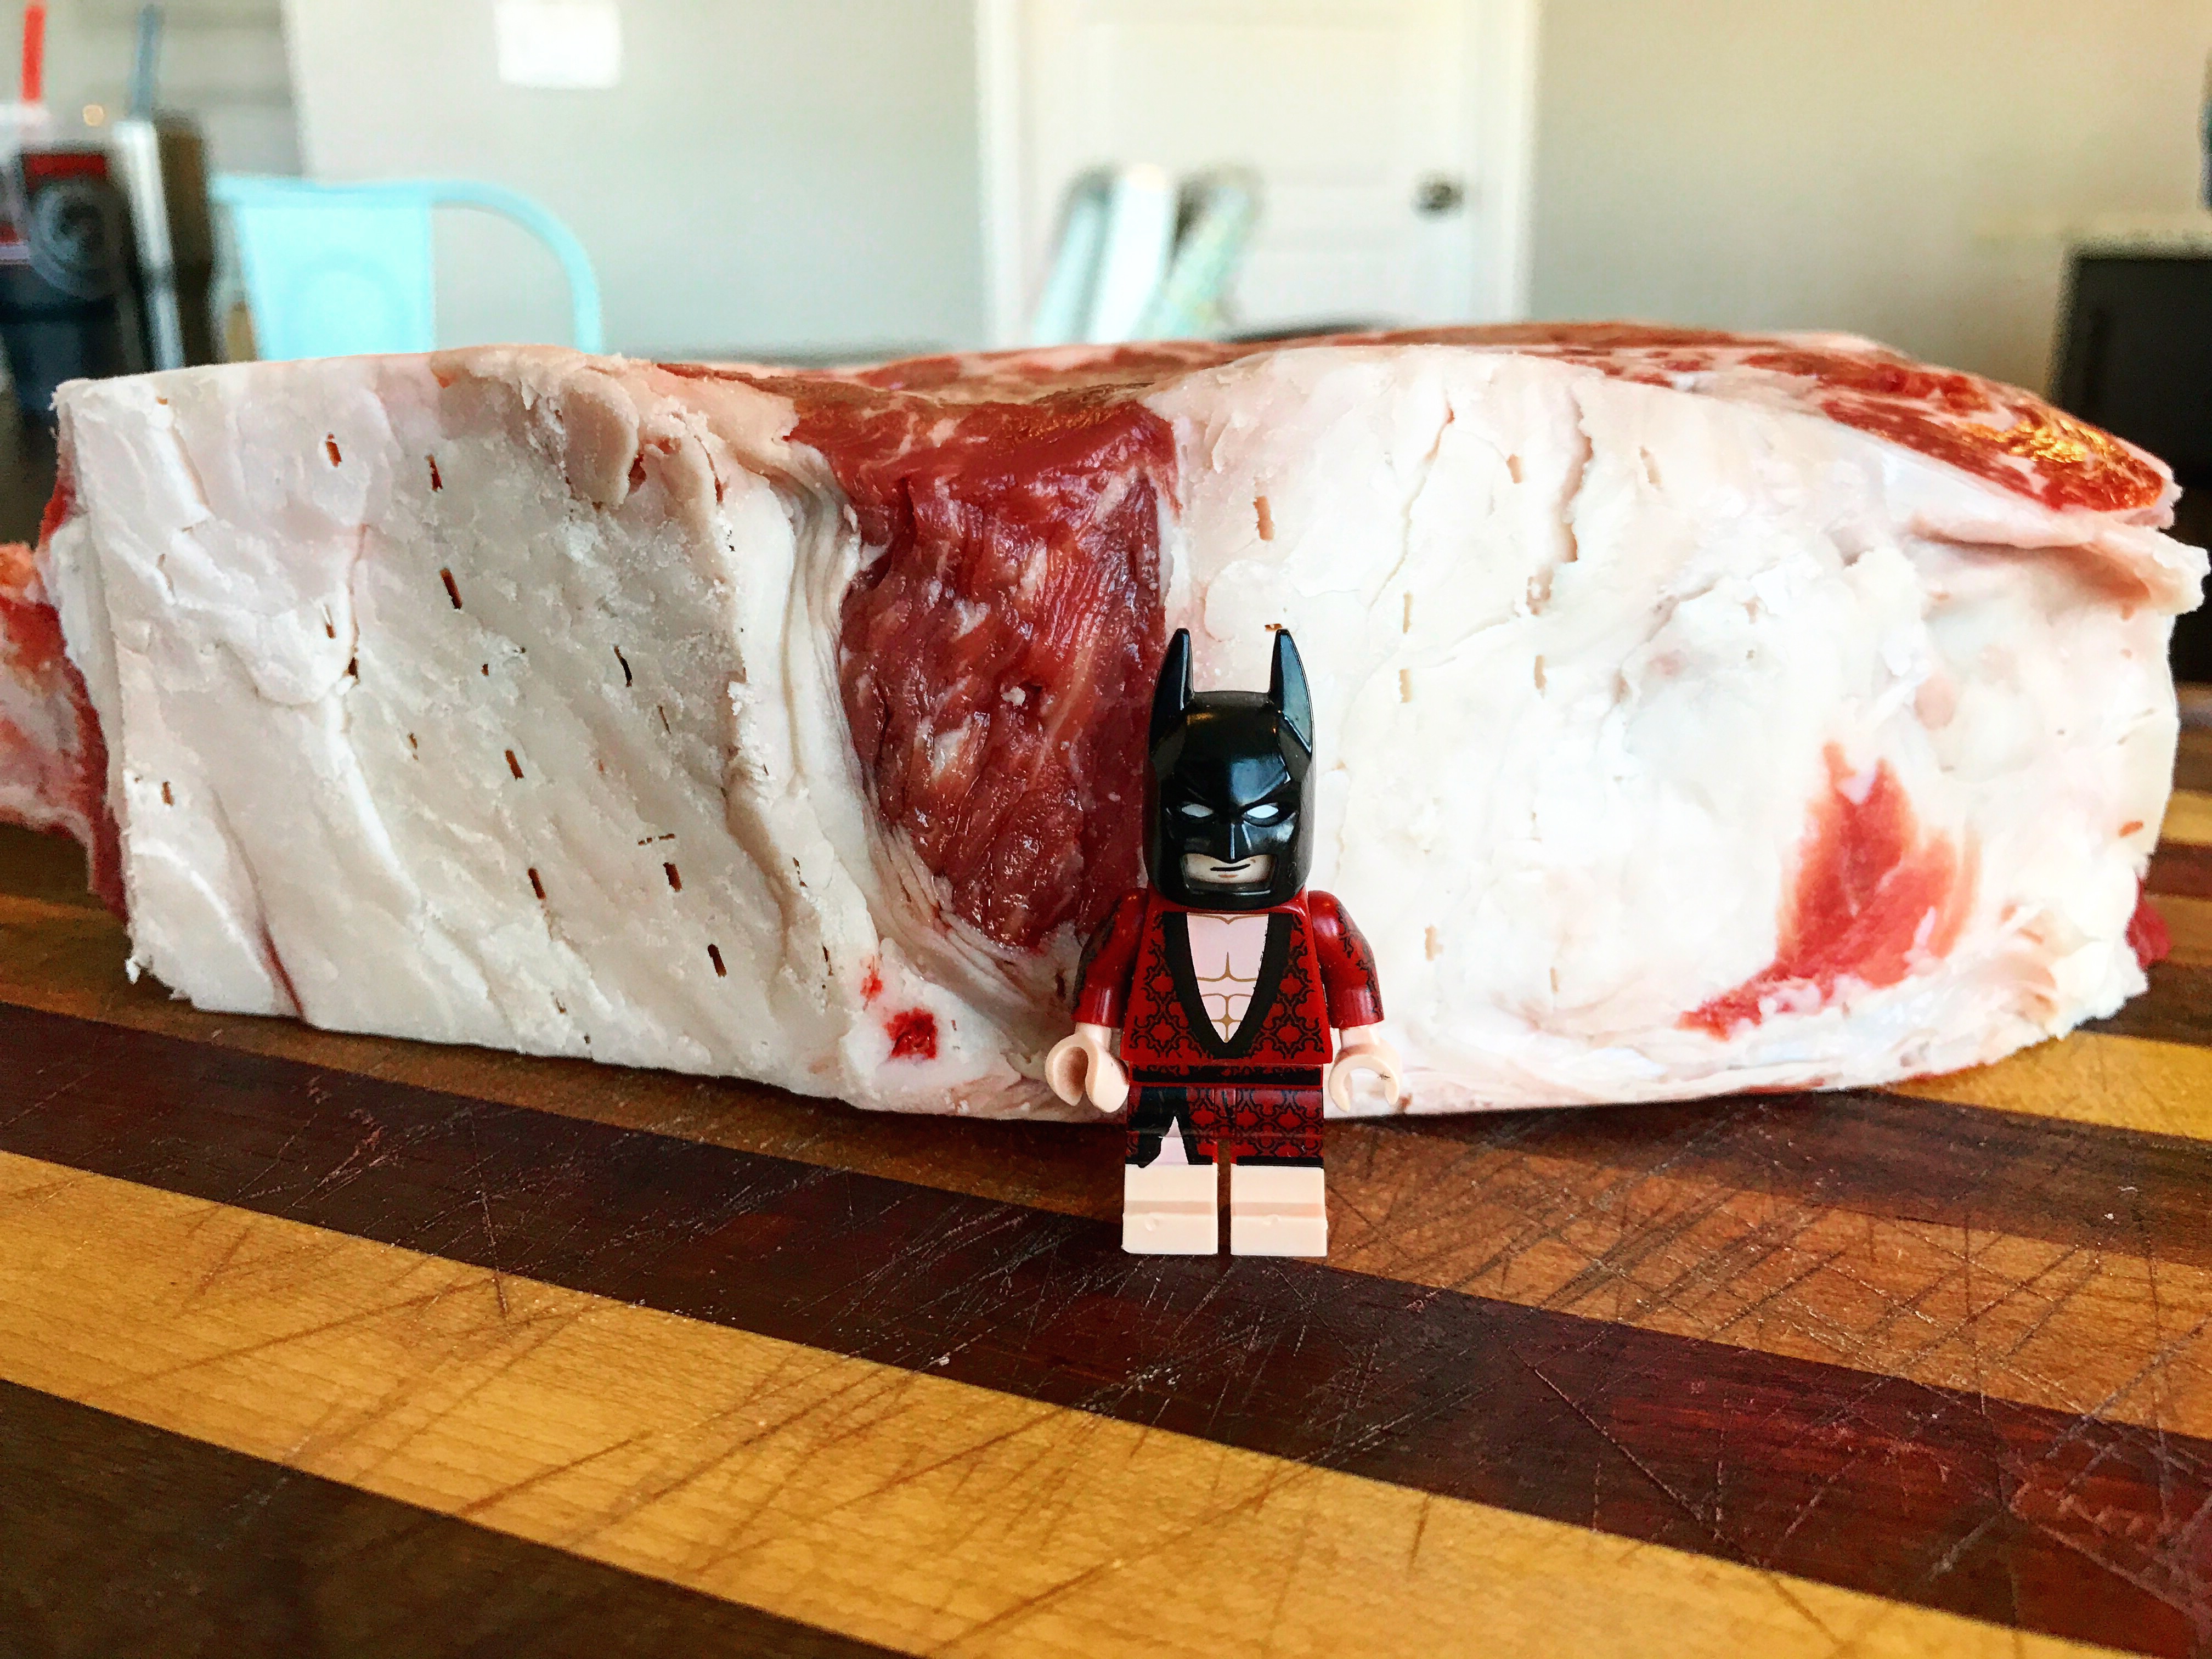 Lego Batman is about 1 3/4" tall. The thickness of the steak rises above the Dark Knight!